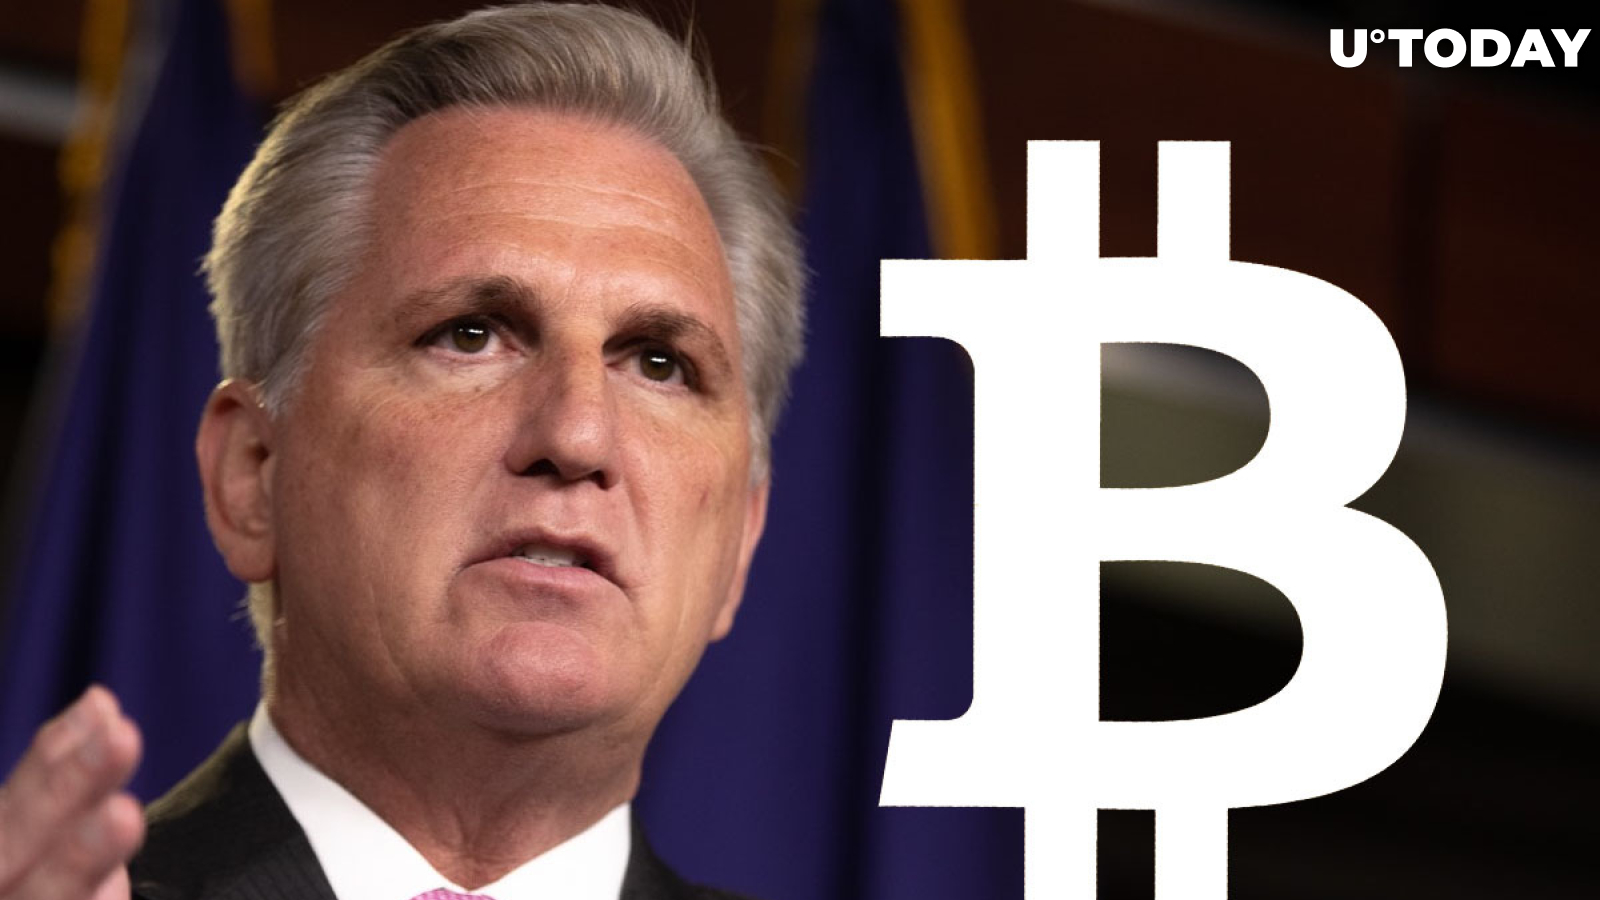 Should Powell Read "The Bitcoin Standard?" GOP House Leader McCarthy Thinks So